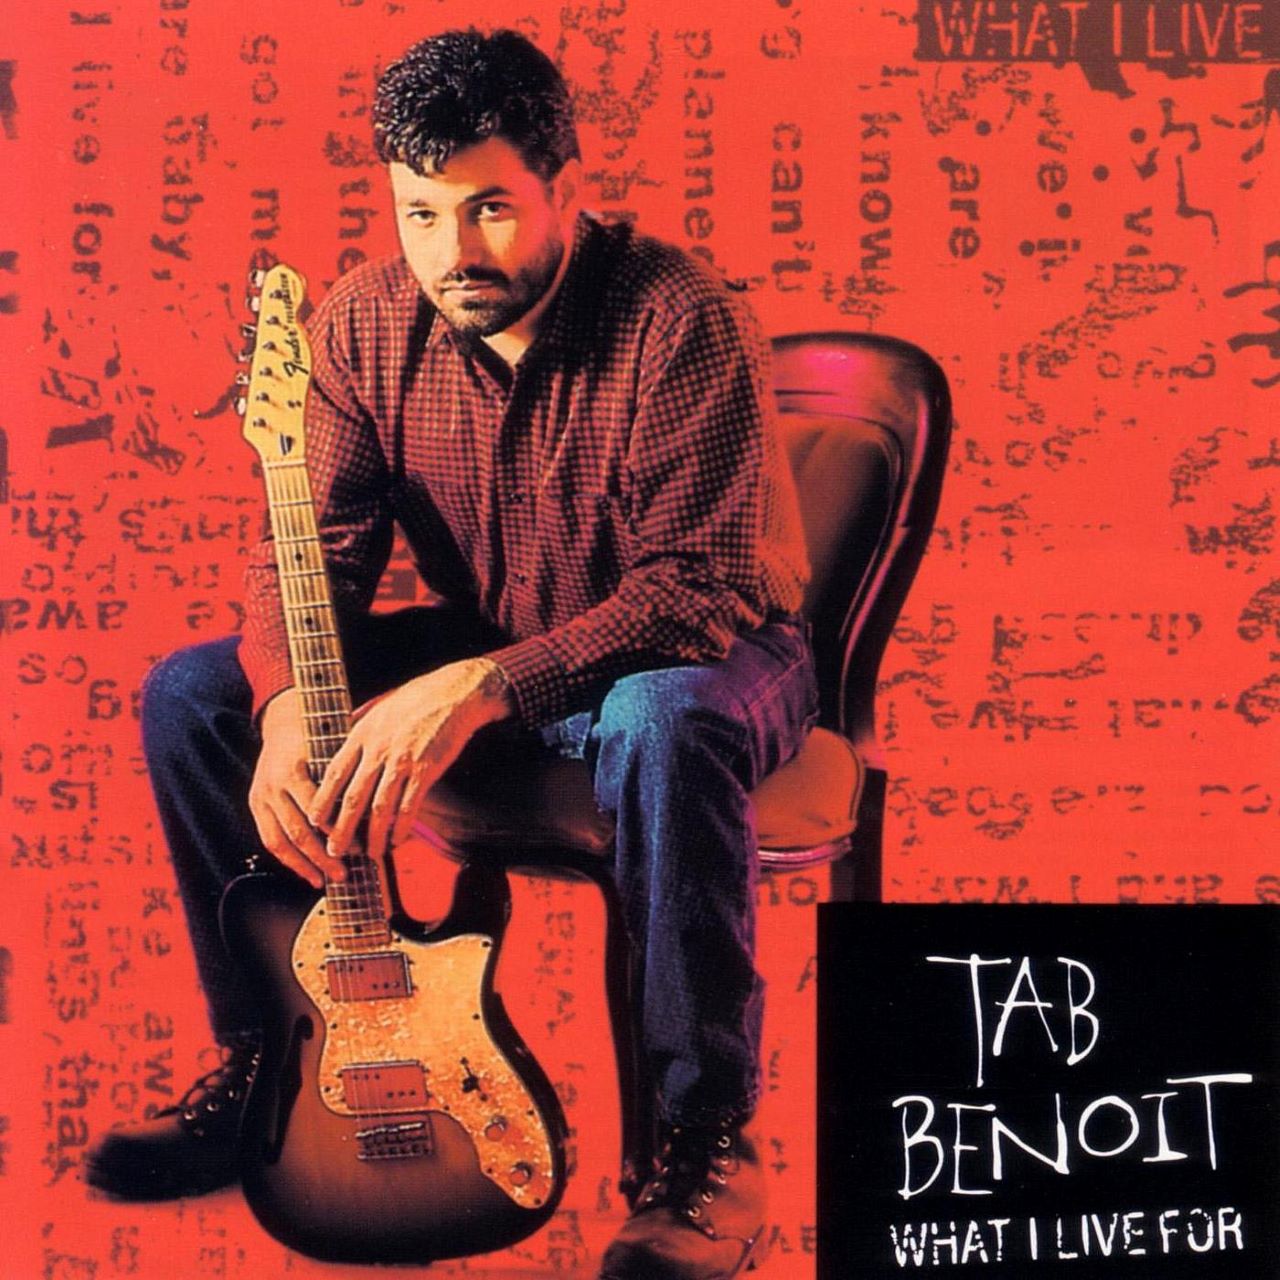 Tab Benoit – What I Live For cover album